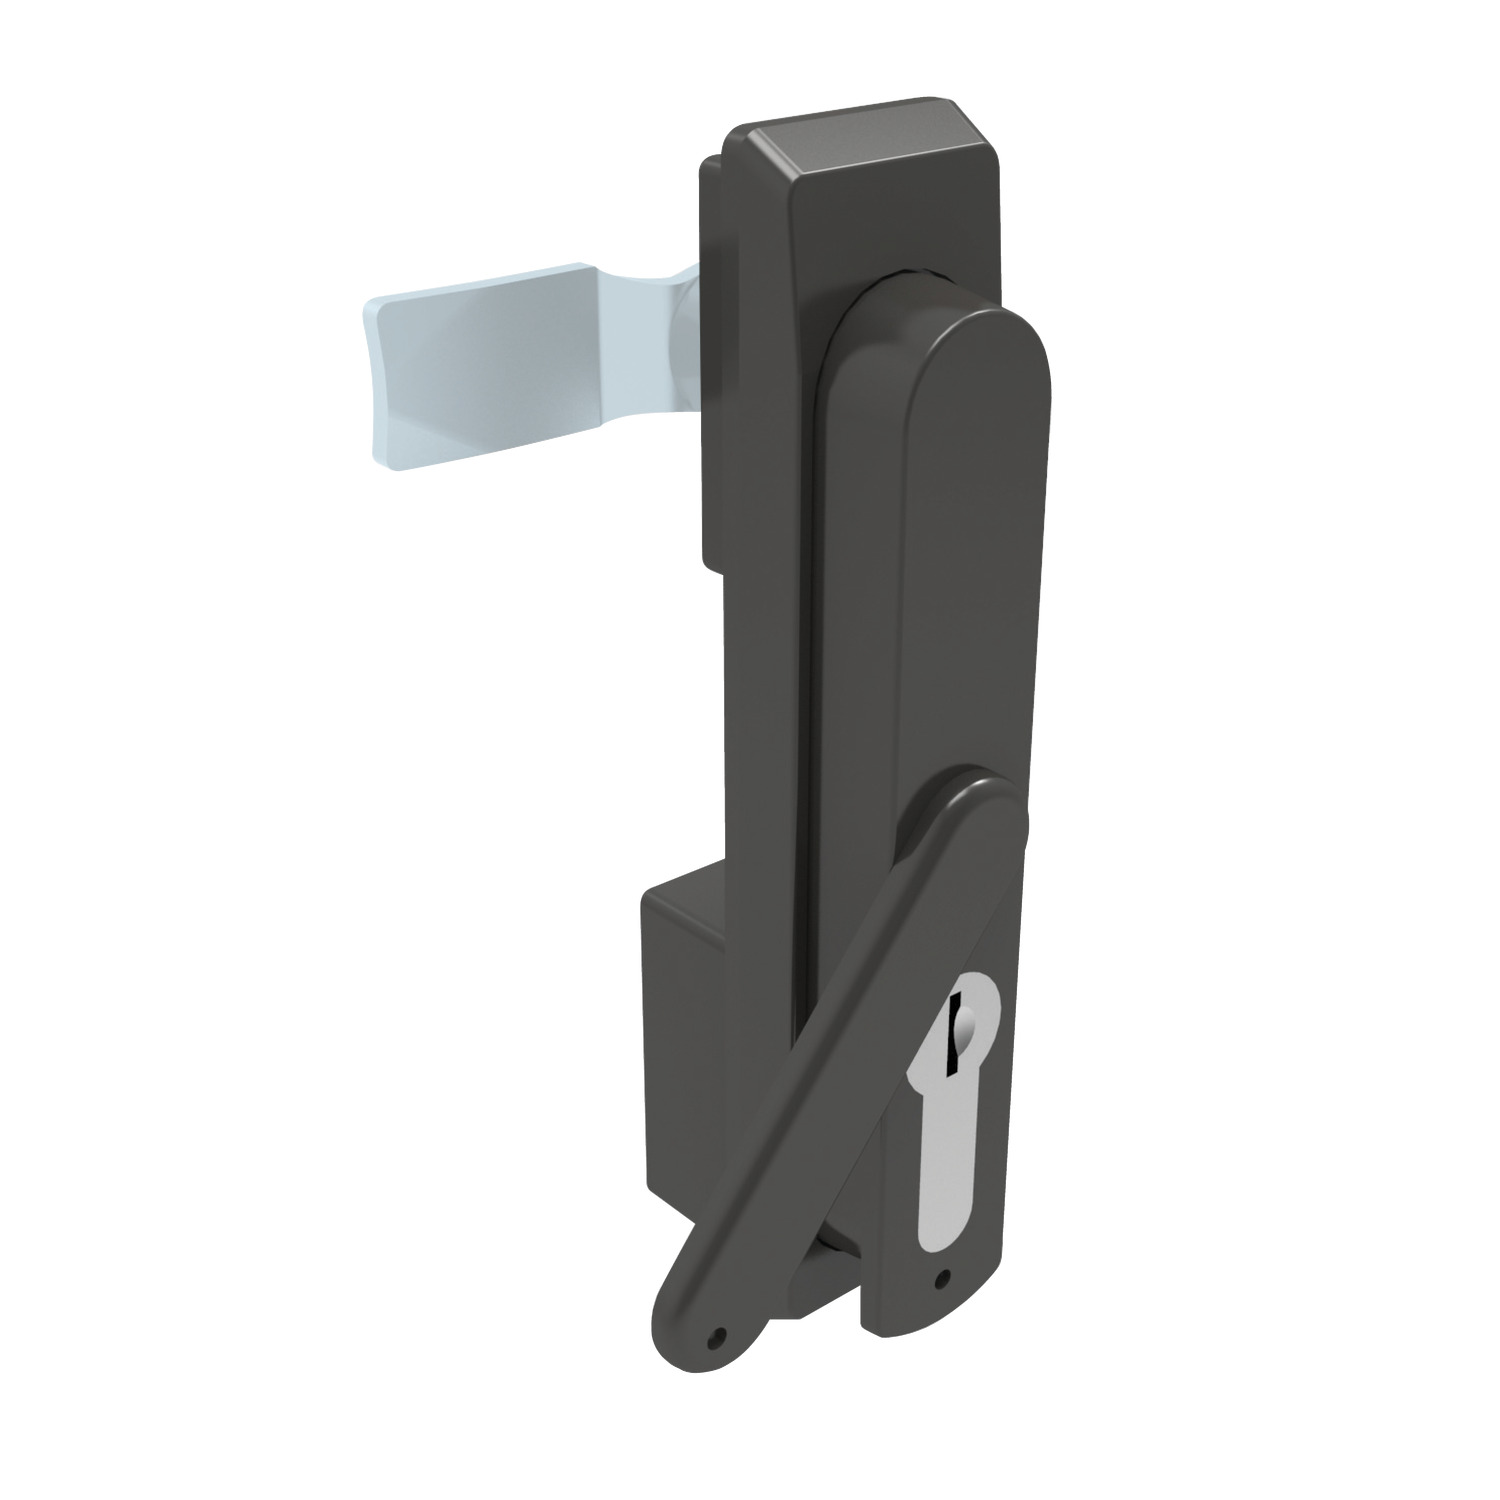 B1082.AW0310 Swing Handles with dust cover. Body Polyamide, Handle Die Cast, black finish. 40 Euro Lock.